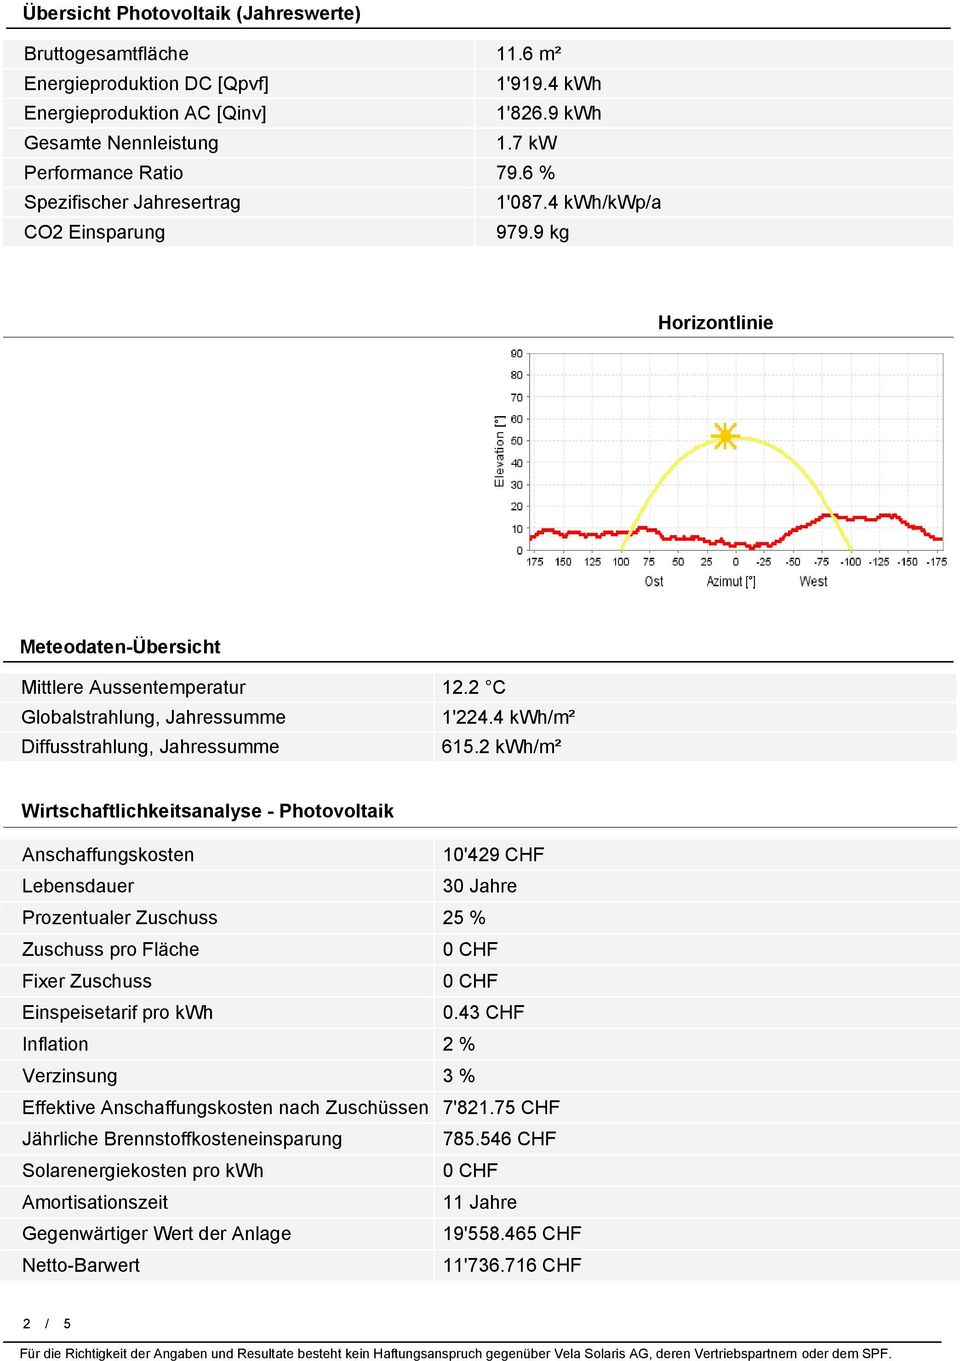 4 kwh/m² Diffusstrahlung, Jahressumme 615.